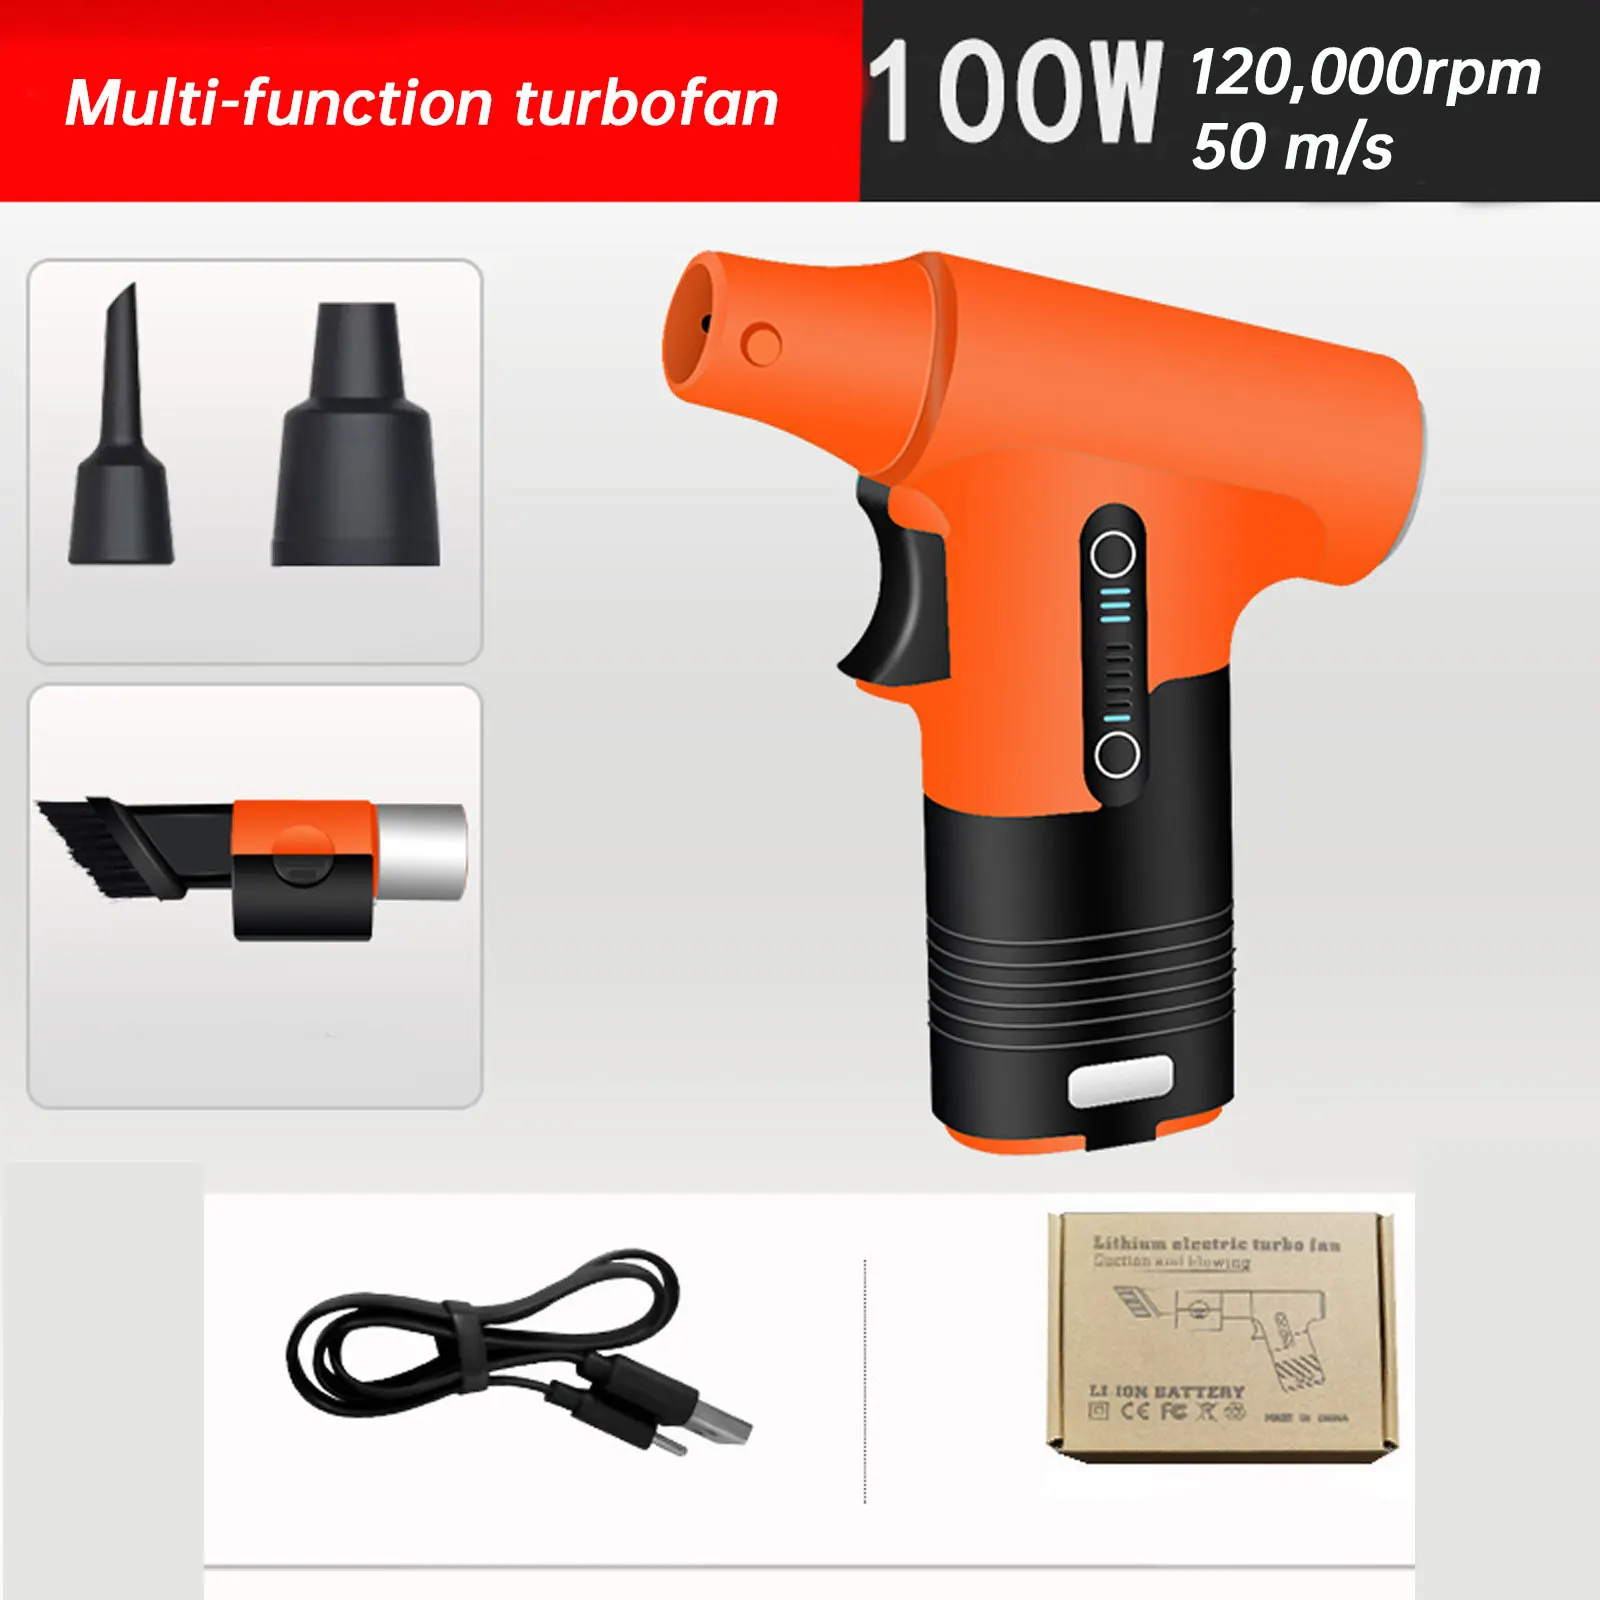 Brushless Motor Jet Fan 120,000RPM Turbofan High Power Dust Blower Compressed Air Duster Keyboard Cleaning Tool Type-C Interface brushless motor jet fan silent high power 110 000rpm turbofan dust blower compressed air duster keyboard cleaning tool type c